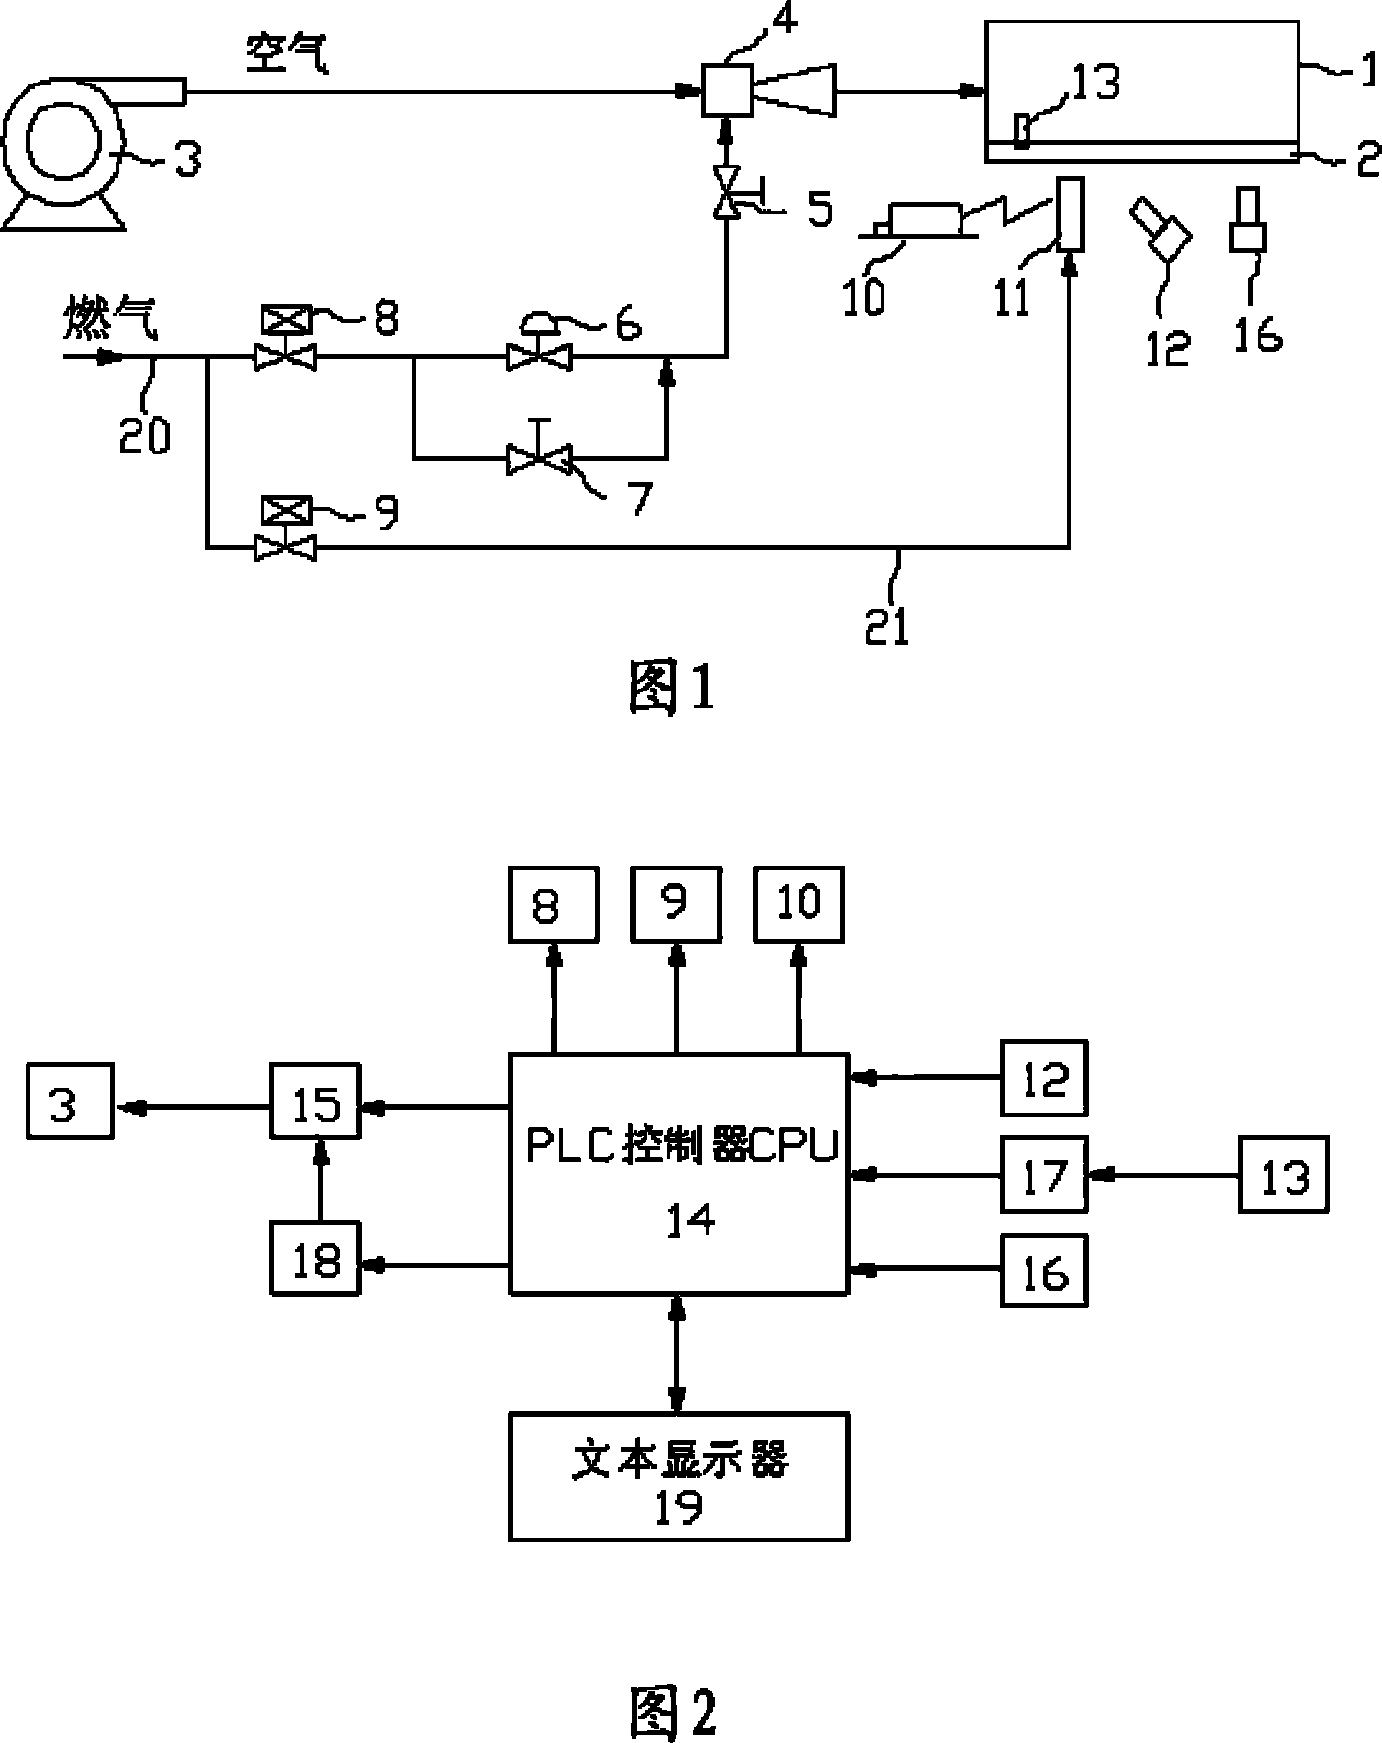 Control system for catalytic combustion